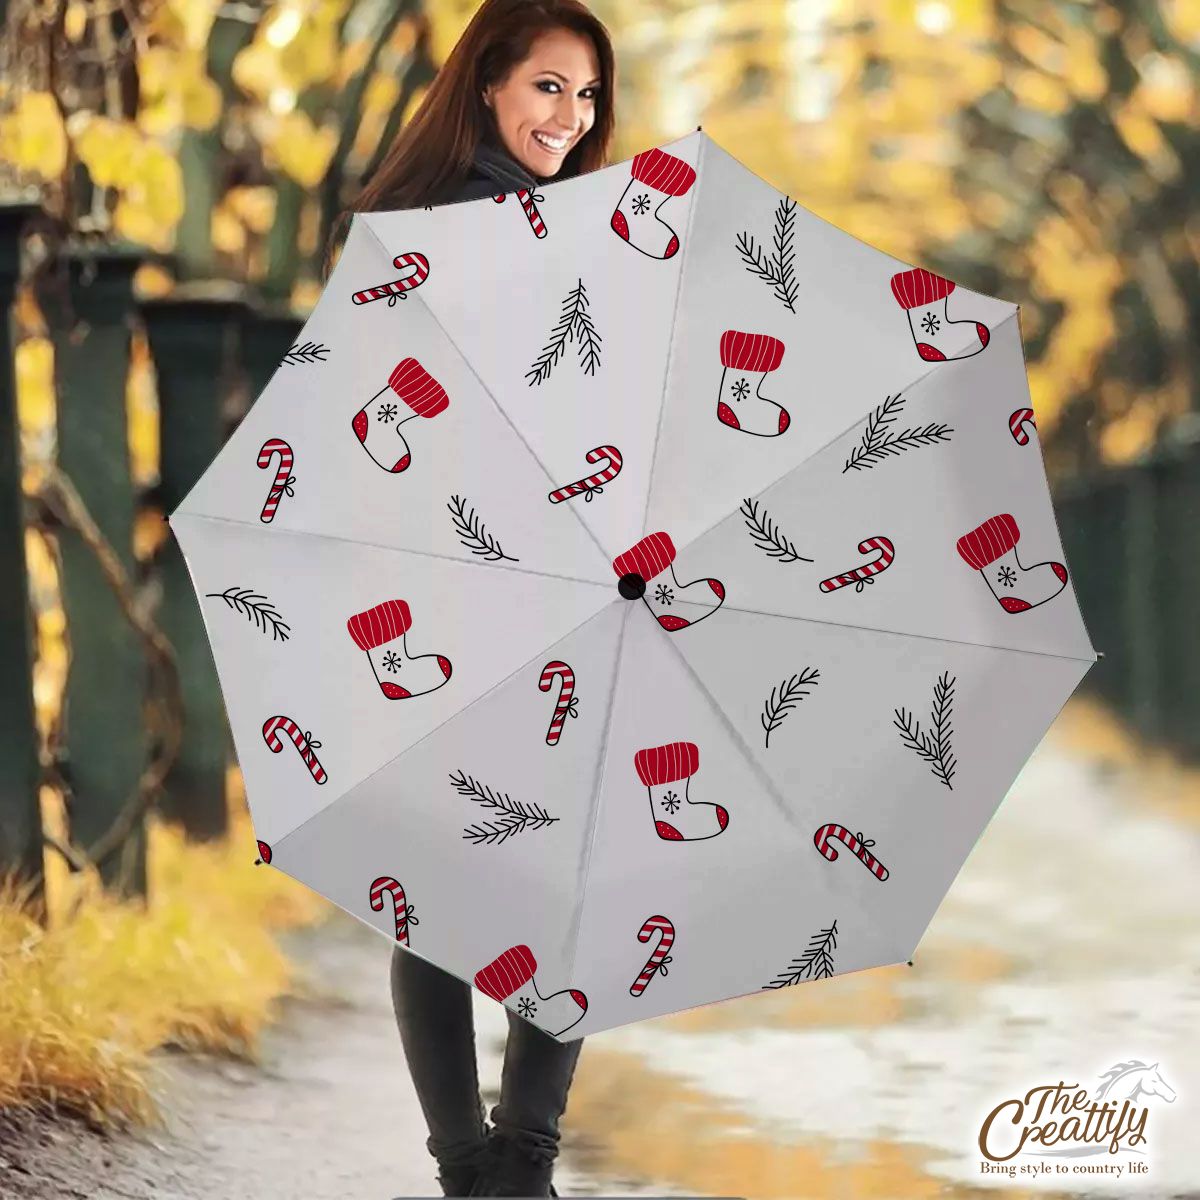 Hand Drawn Red Socks, Christmas Tree Branch And Candy Canes White Pattern Umbrella